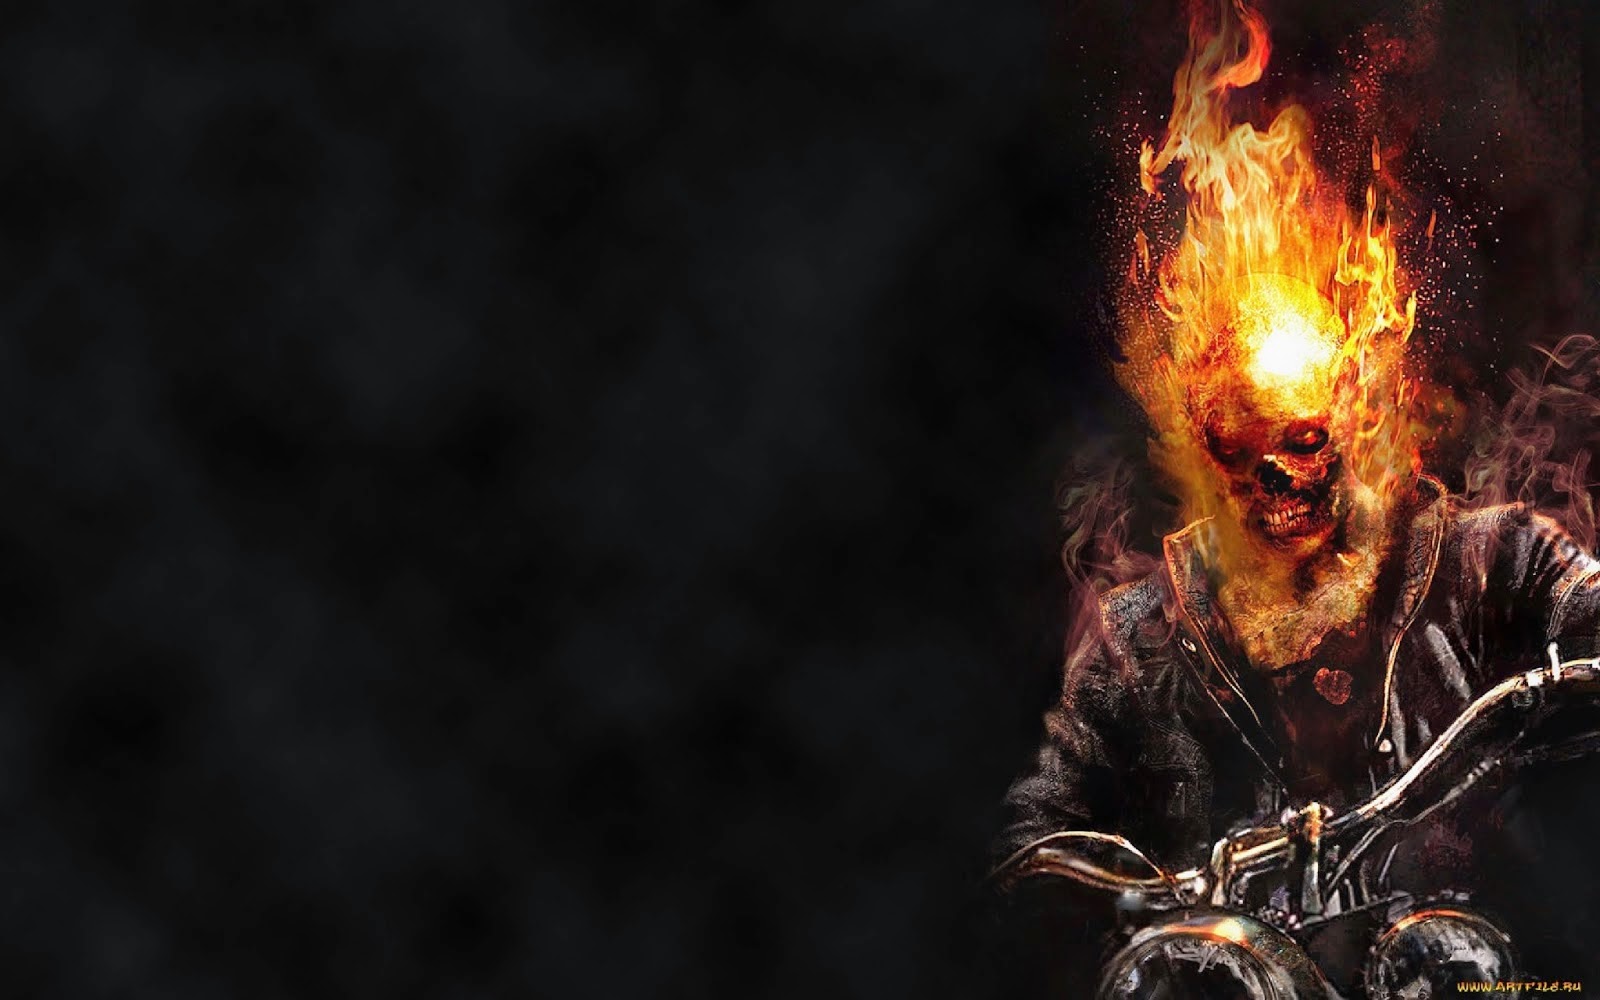 ghost wallpaper download,flame,cg artwork,fire,fictional character,games